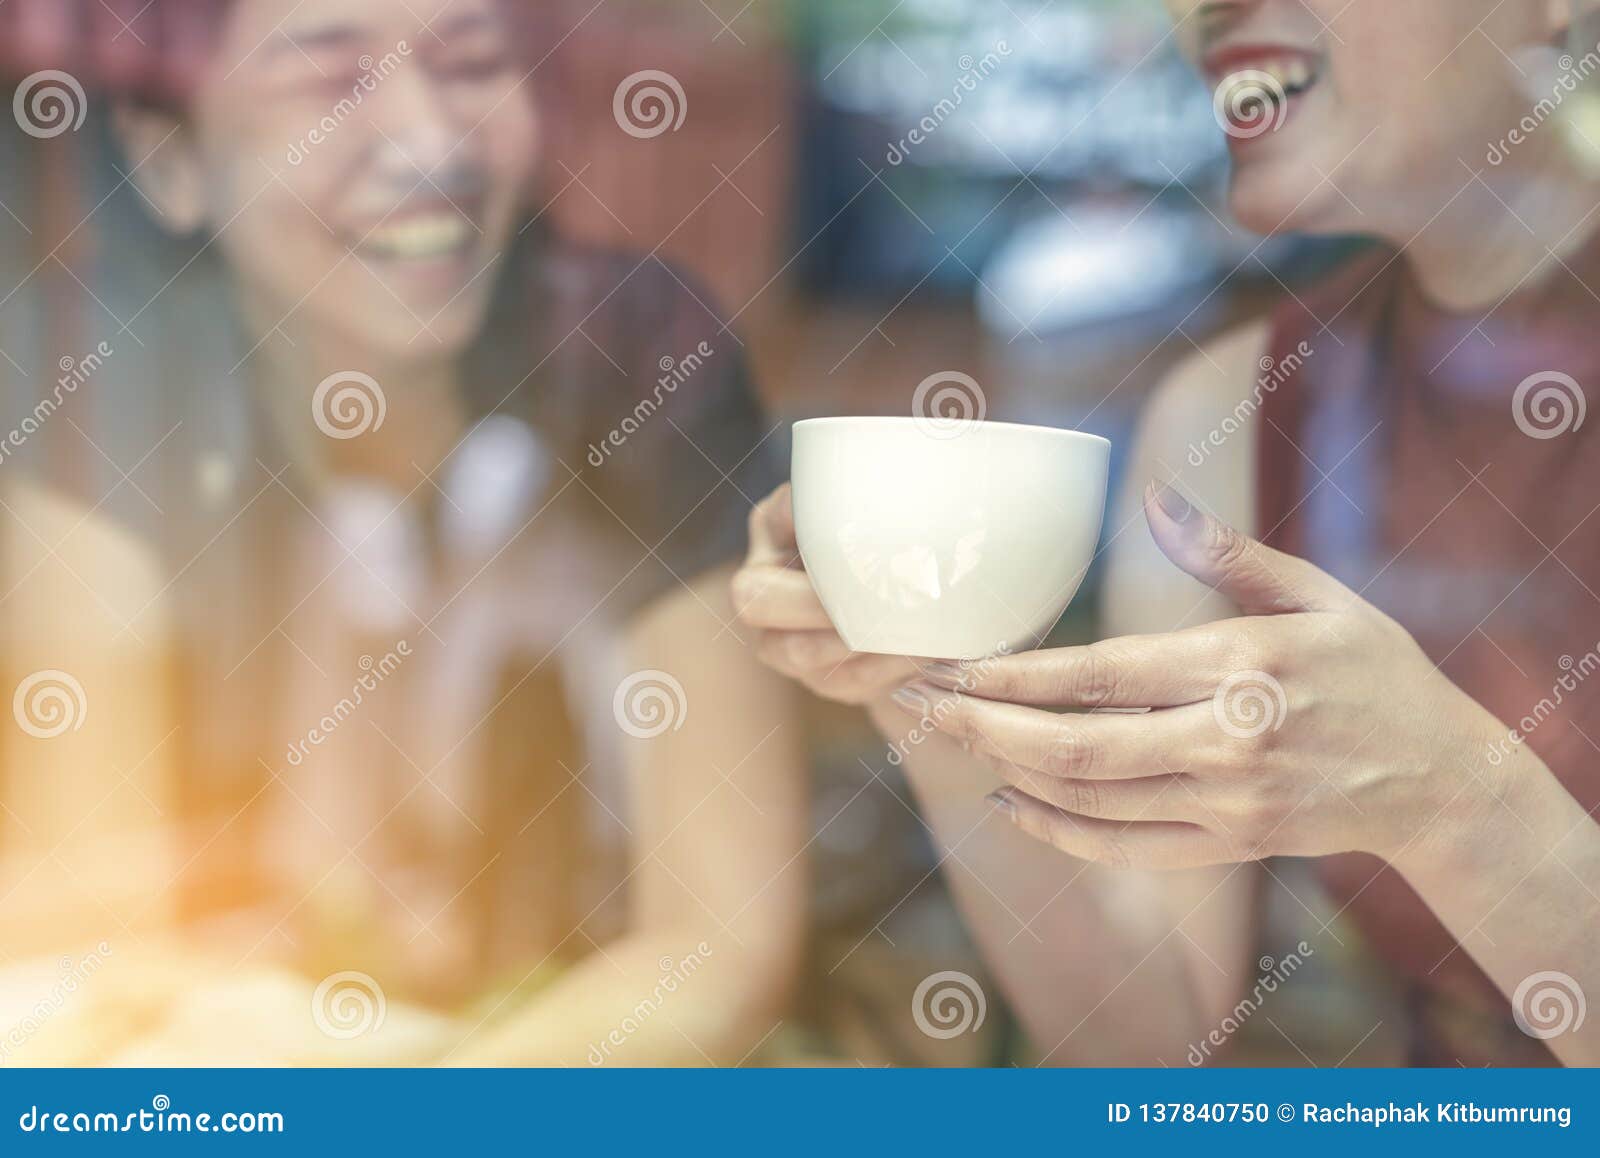 two asian women,friends having a free time drinking coffee at cafe. friends laughing together while drinking a coffee in the resta